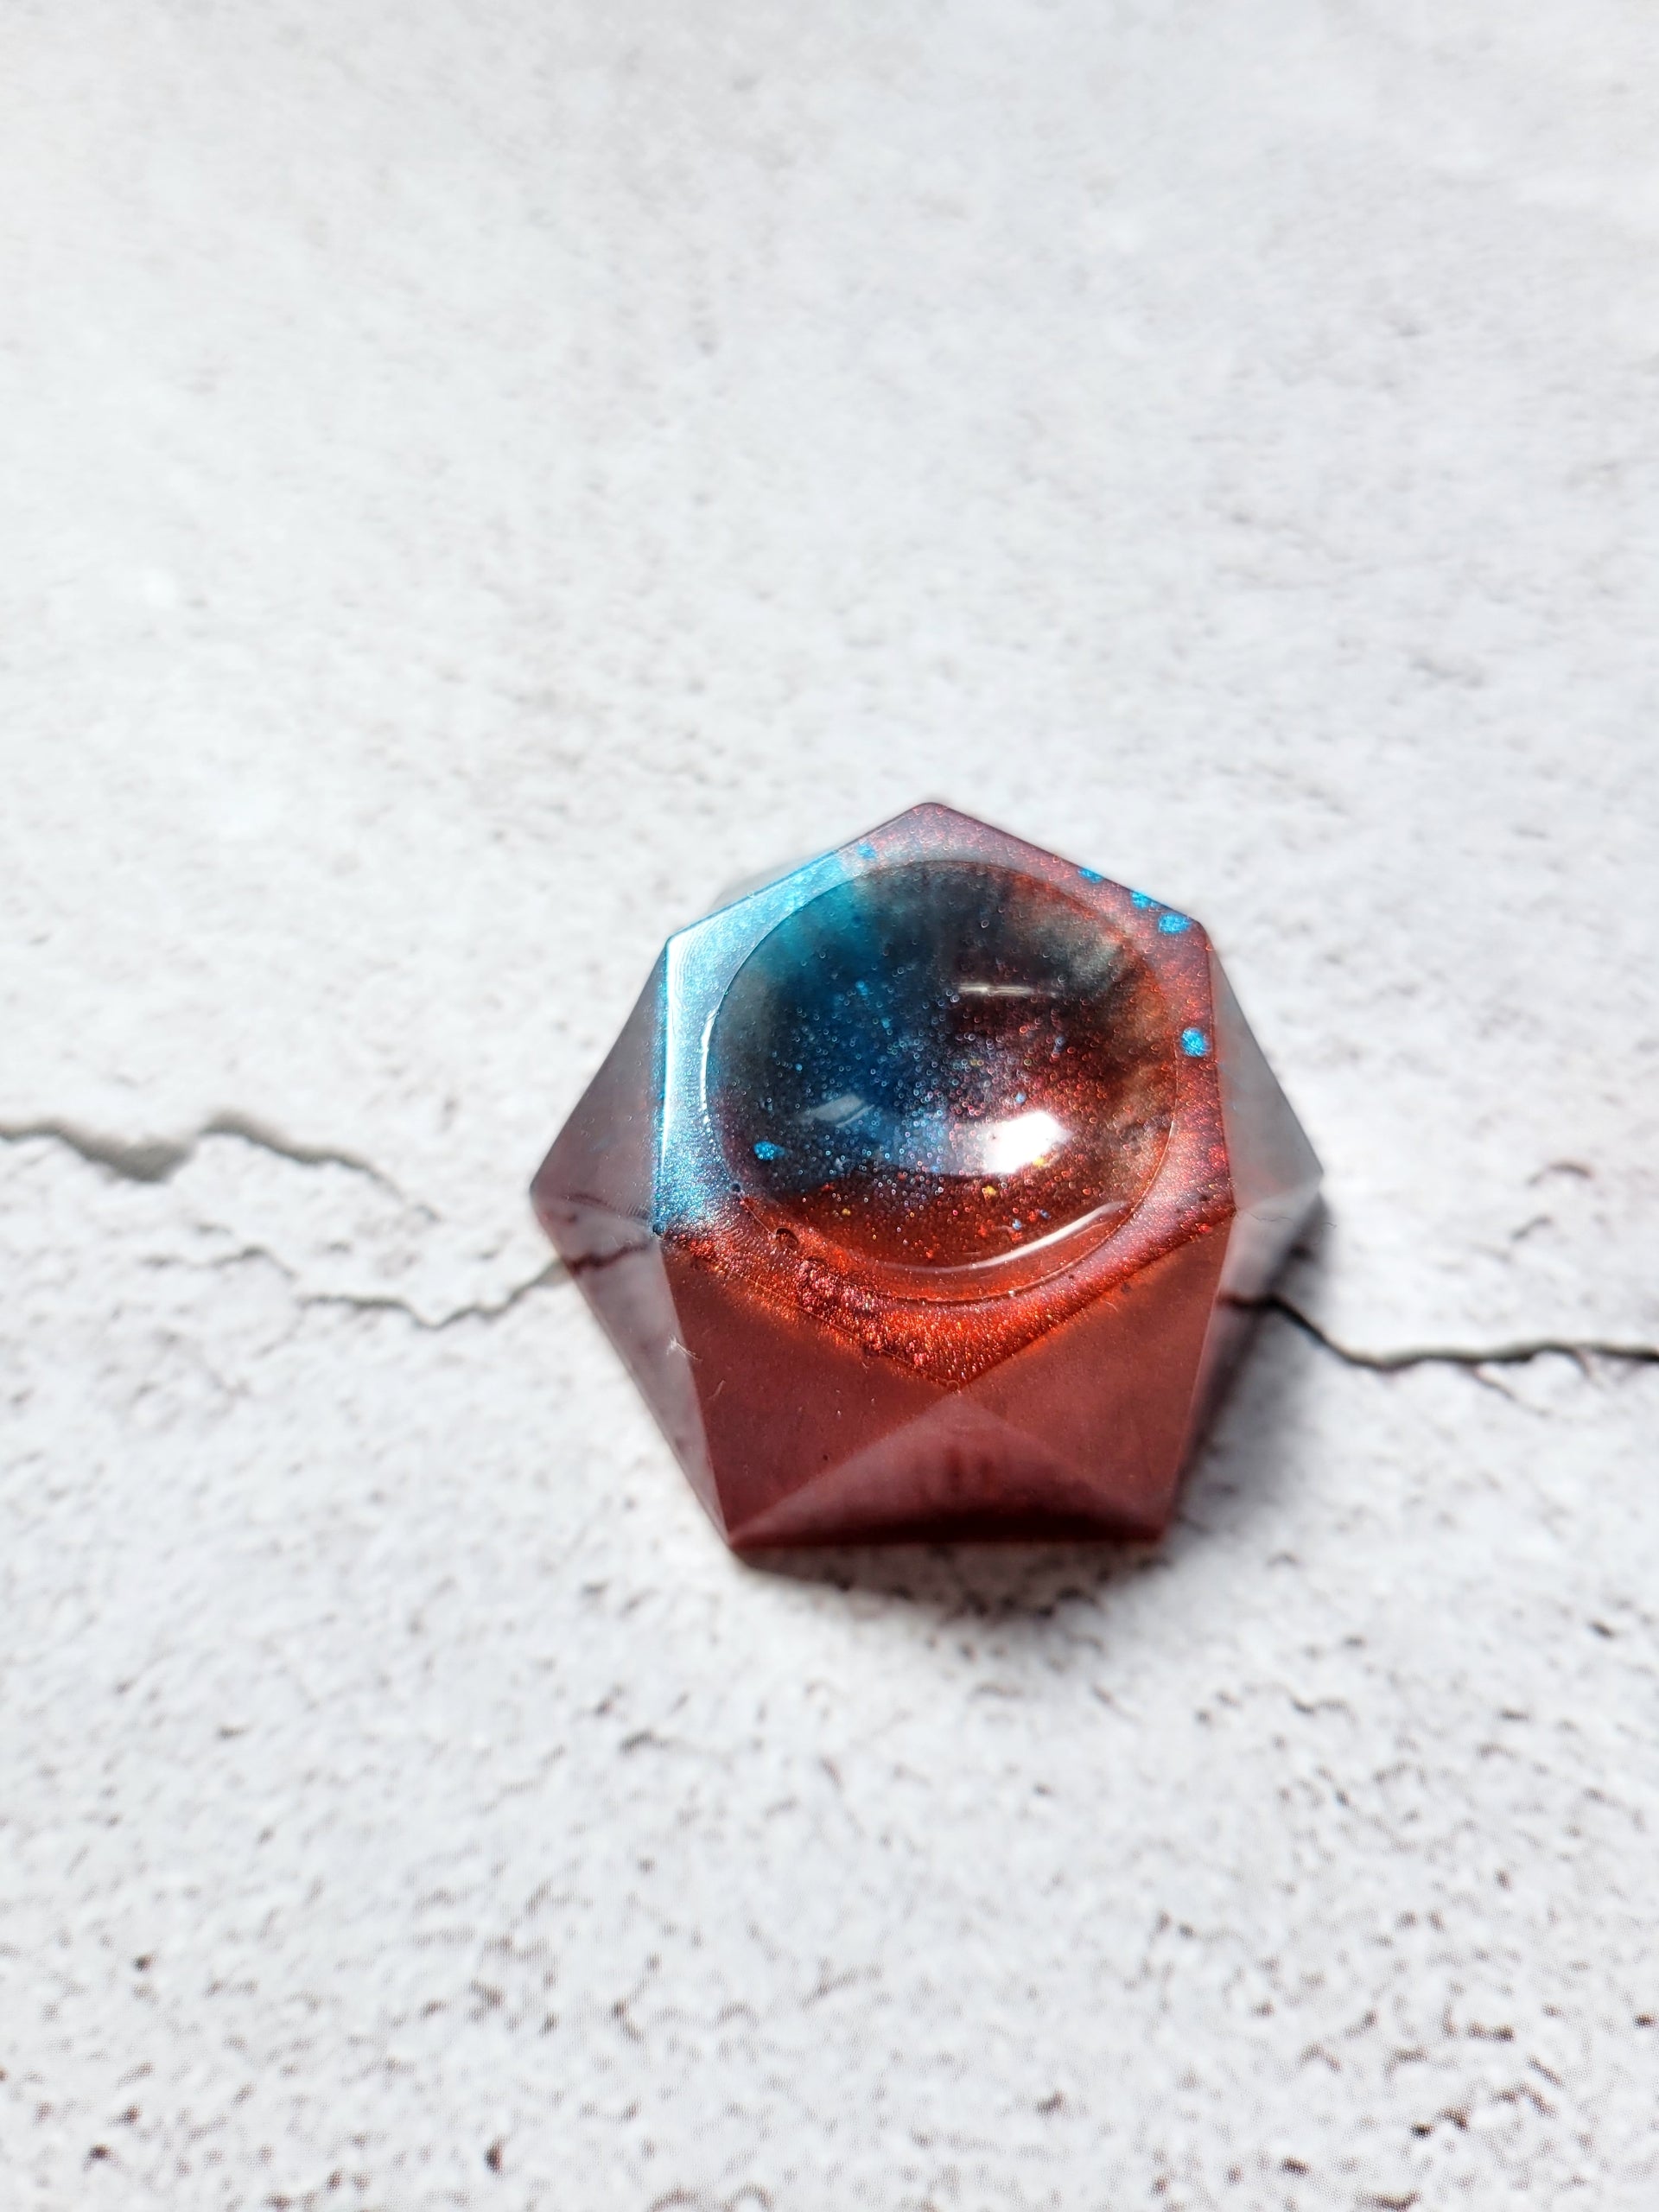 A side view of a hexagonal stand for dice or tabletop familiar. It is red and blue.